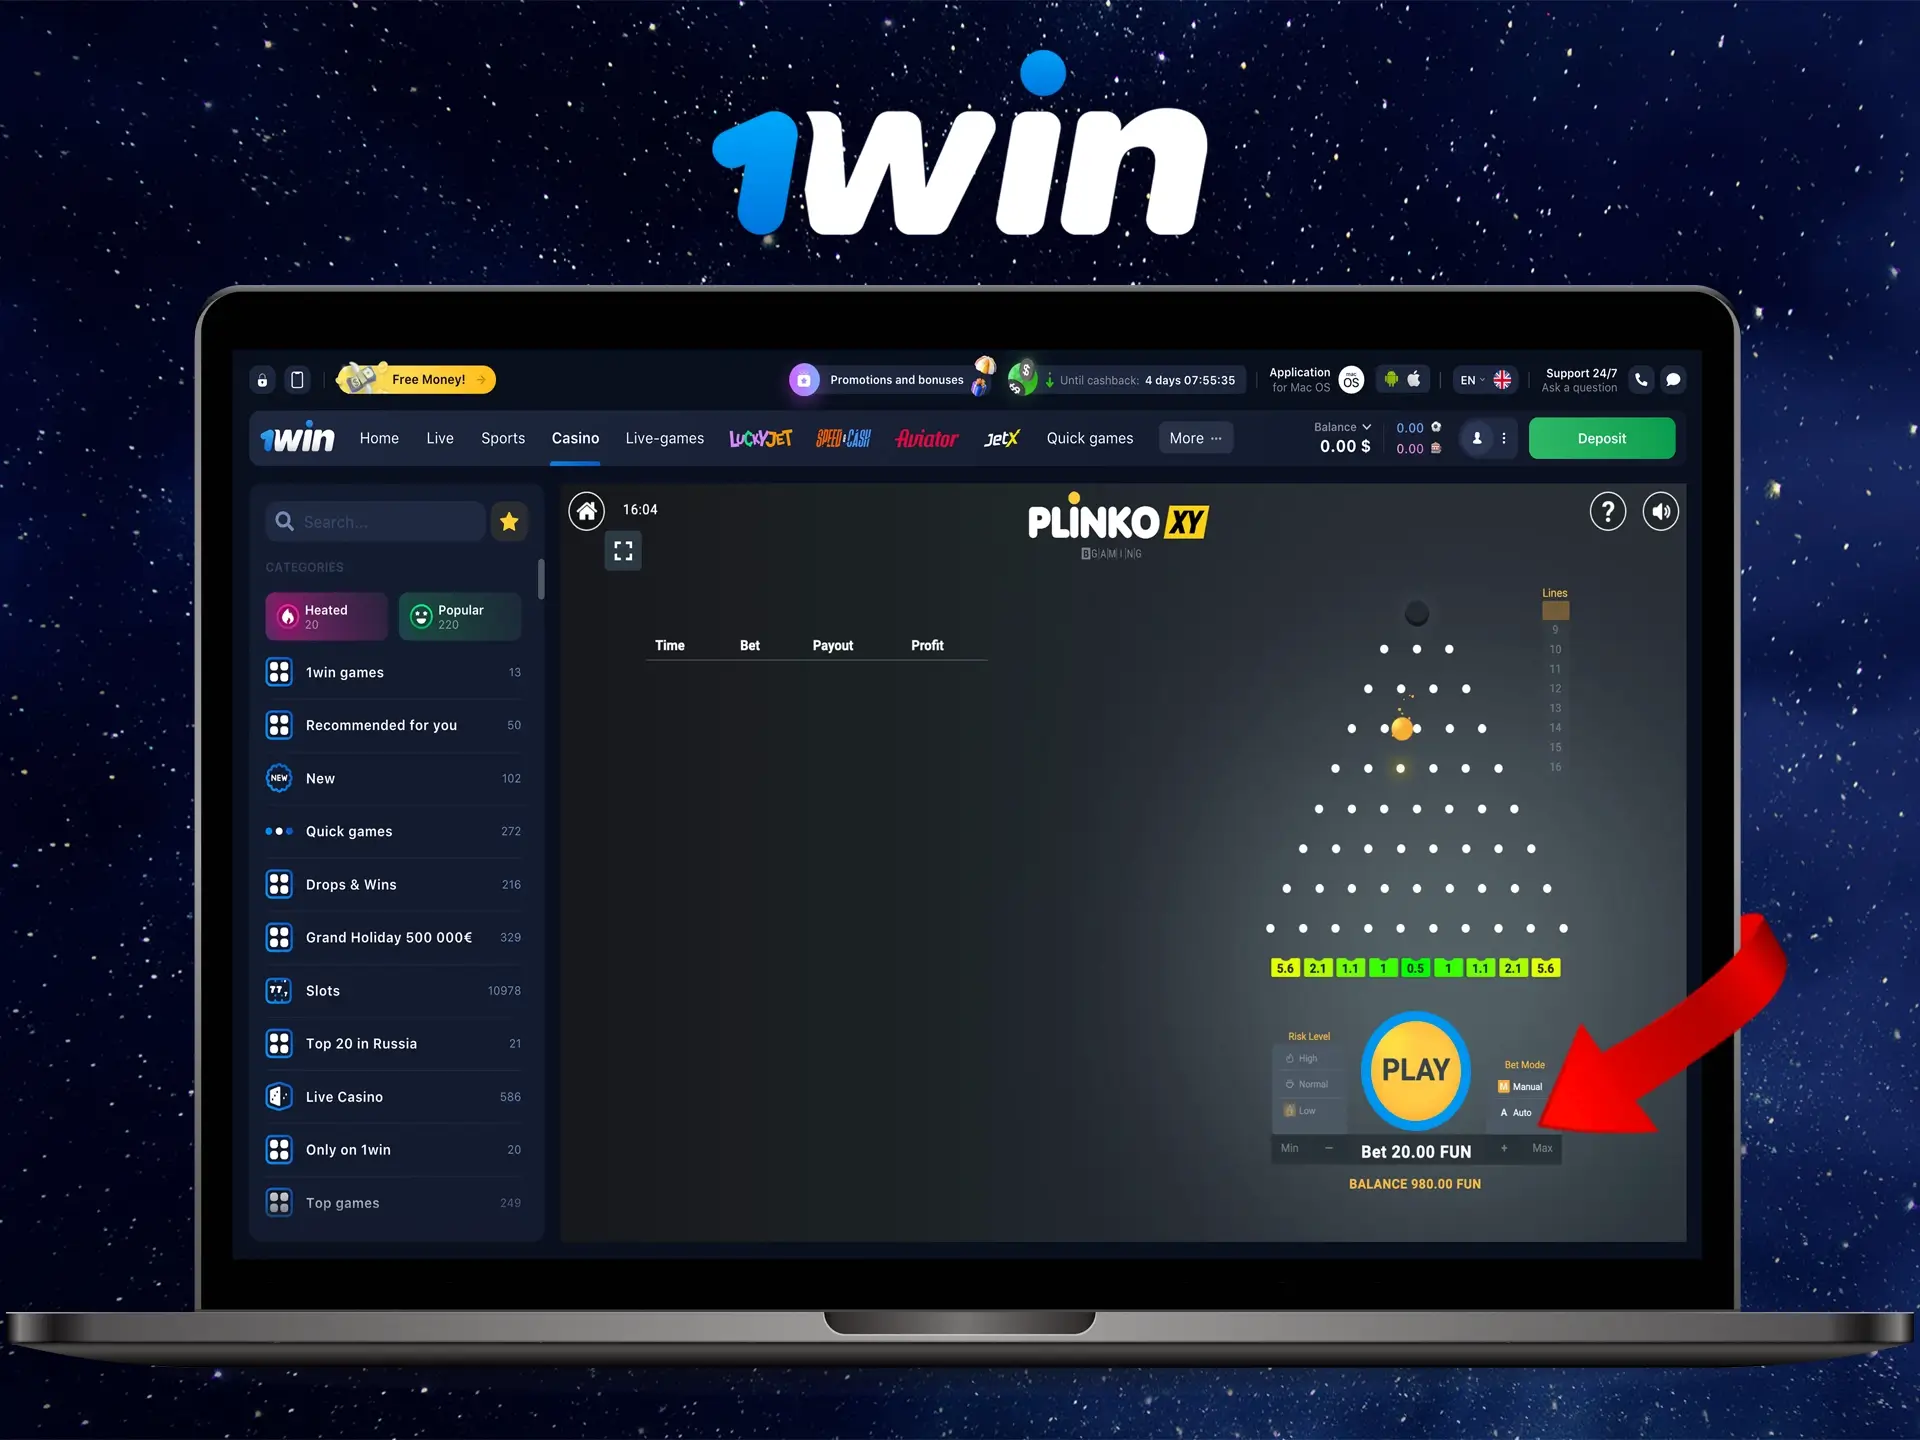 Place your bets and win in the Plinko game from 1Win Casino.